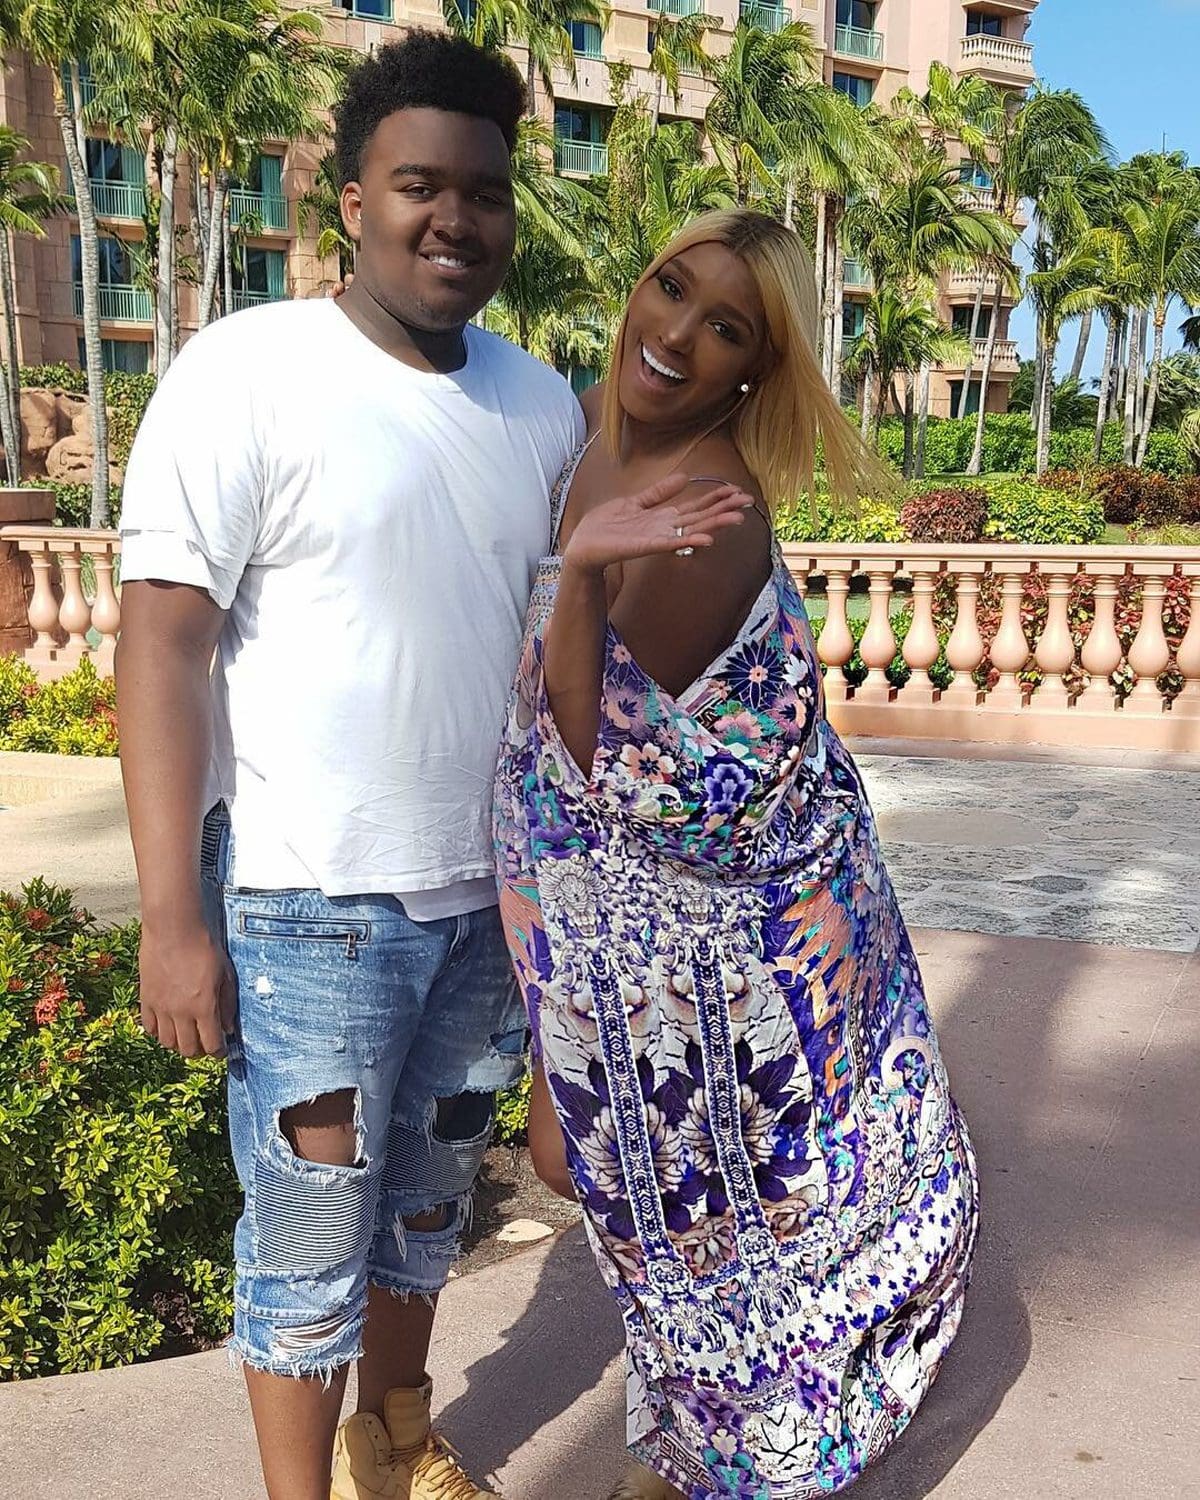 NeNe Leakes And Gregg Leakes' Son, Brentt Has The Most Exciting Q&A With His Parents - Check Out His YouTube Video